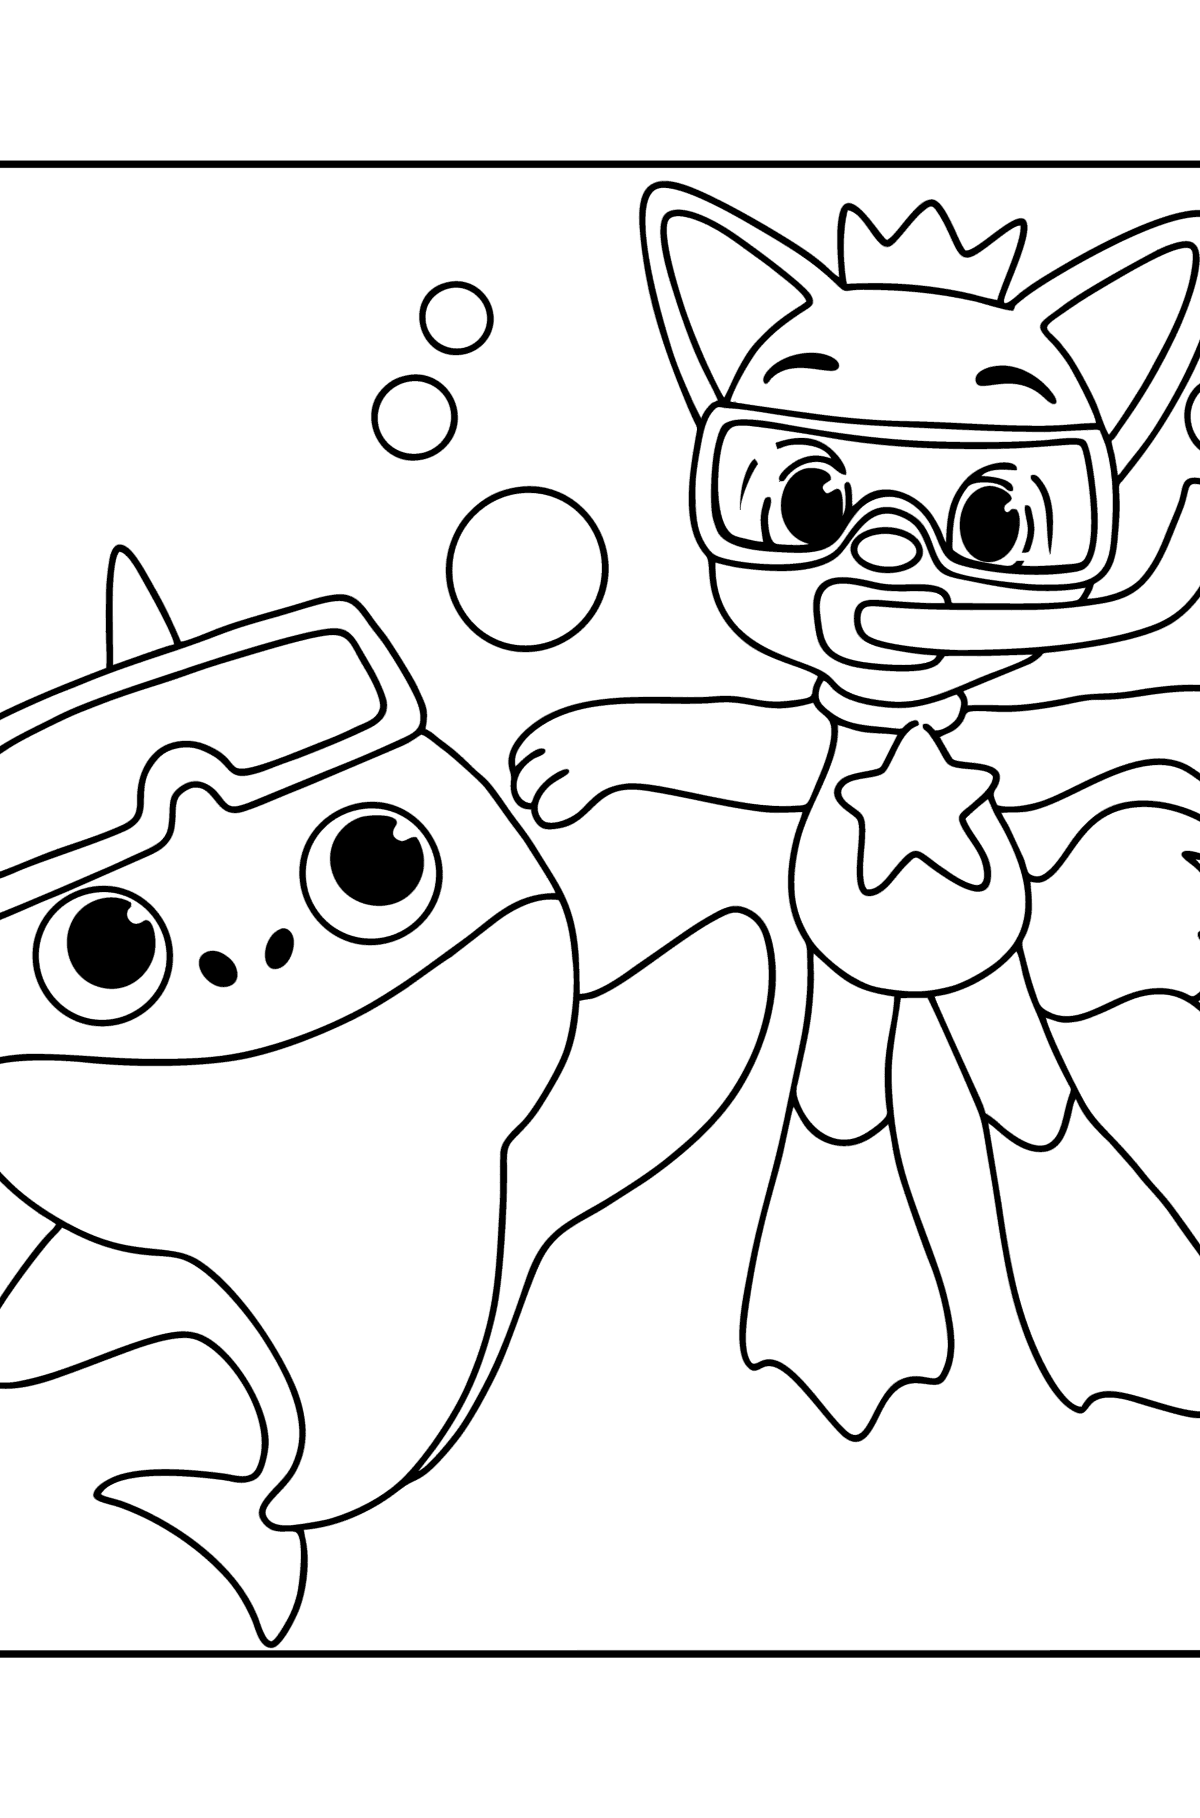 Cute Pinkfong Baby shark coloring page - Coloring Pages for Kids